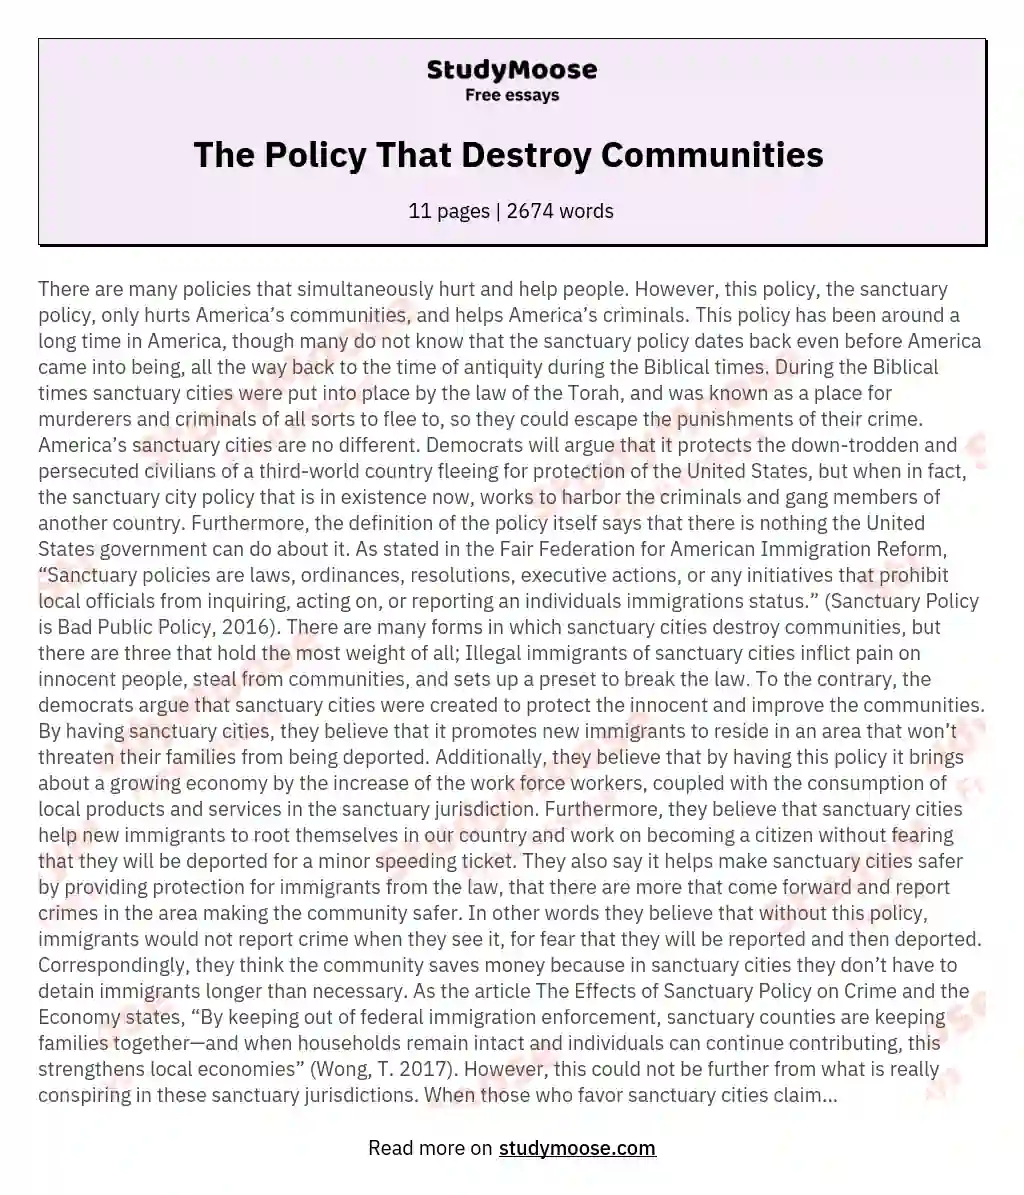 The Policy That Destroy Communities  essay